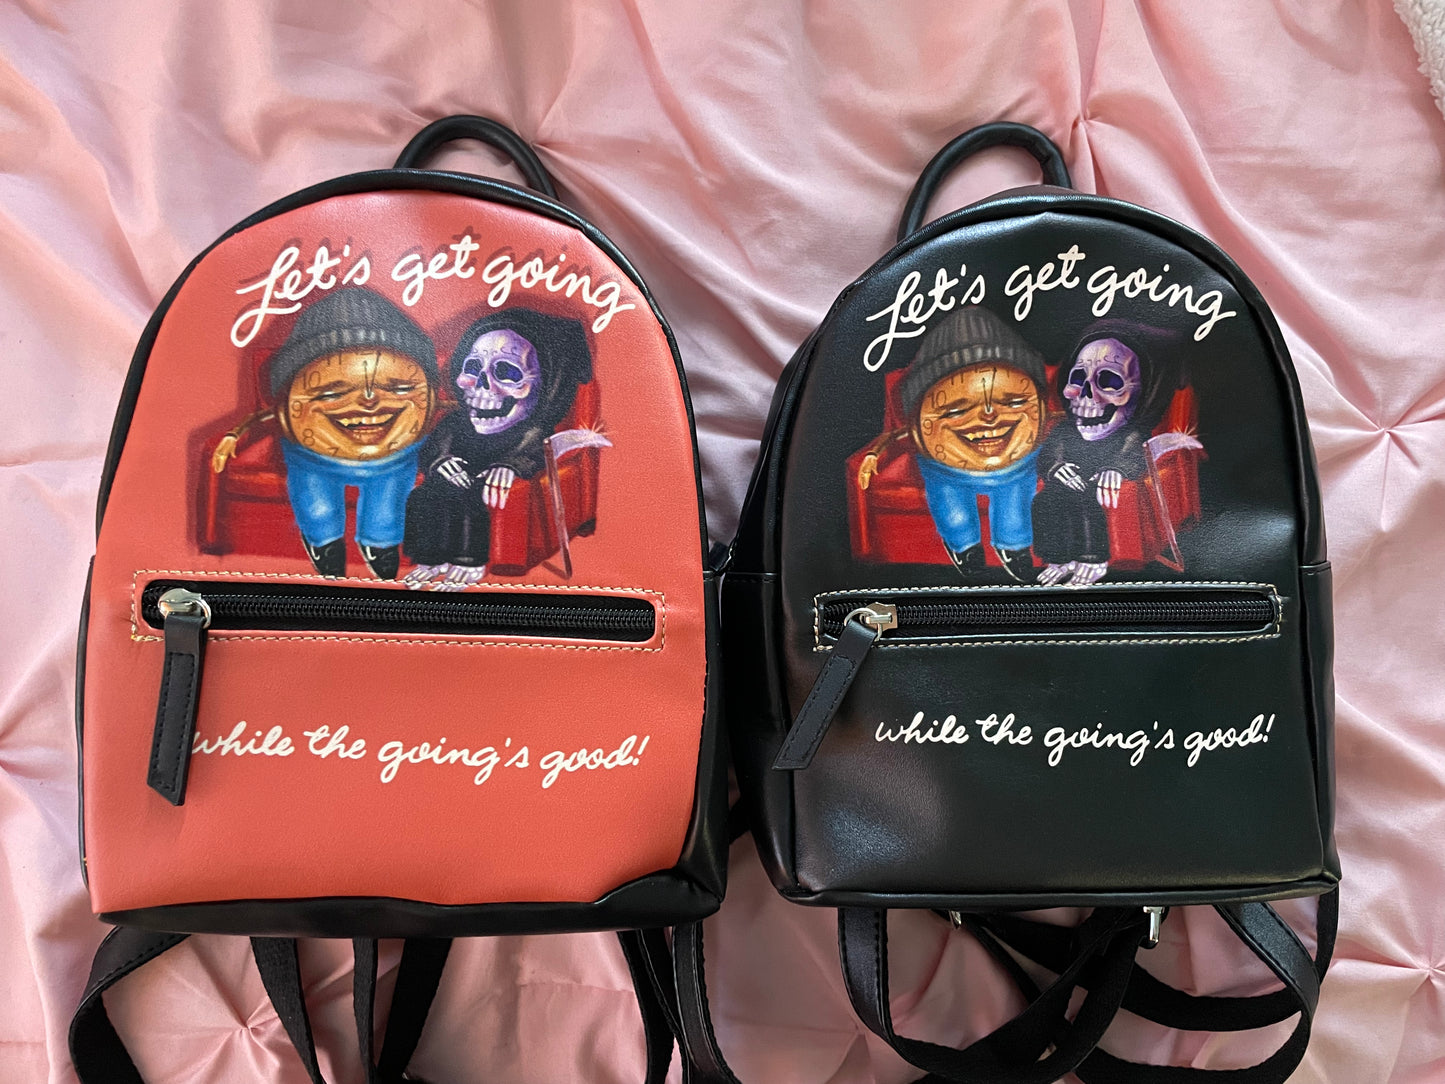 Let's get going while the going is good purse backpack